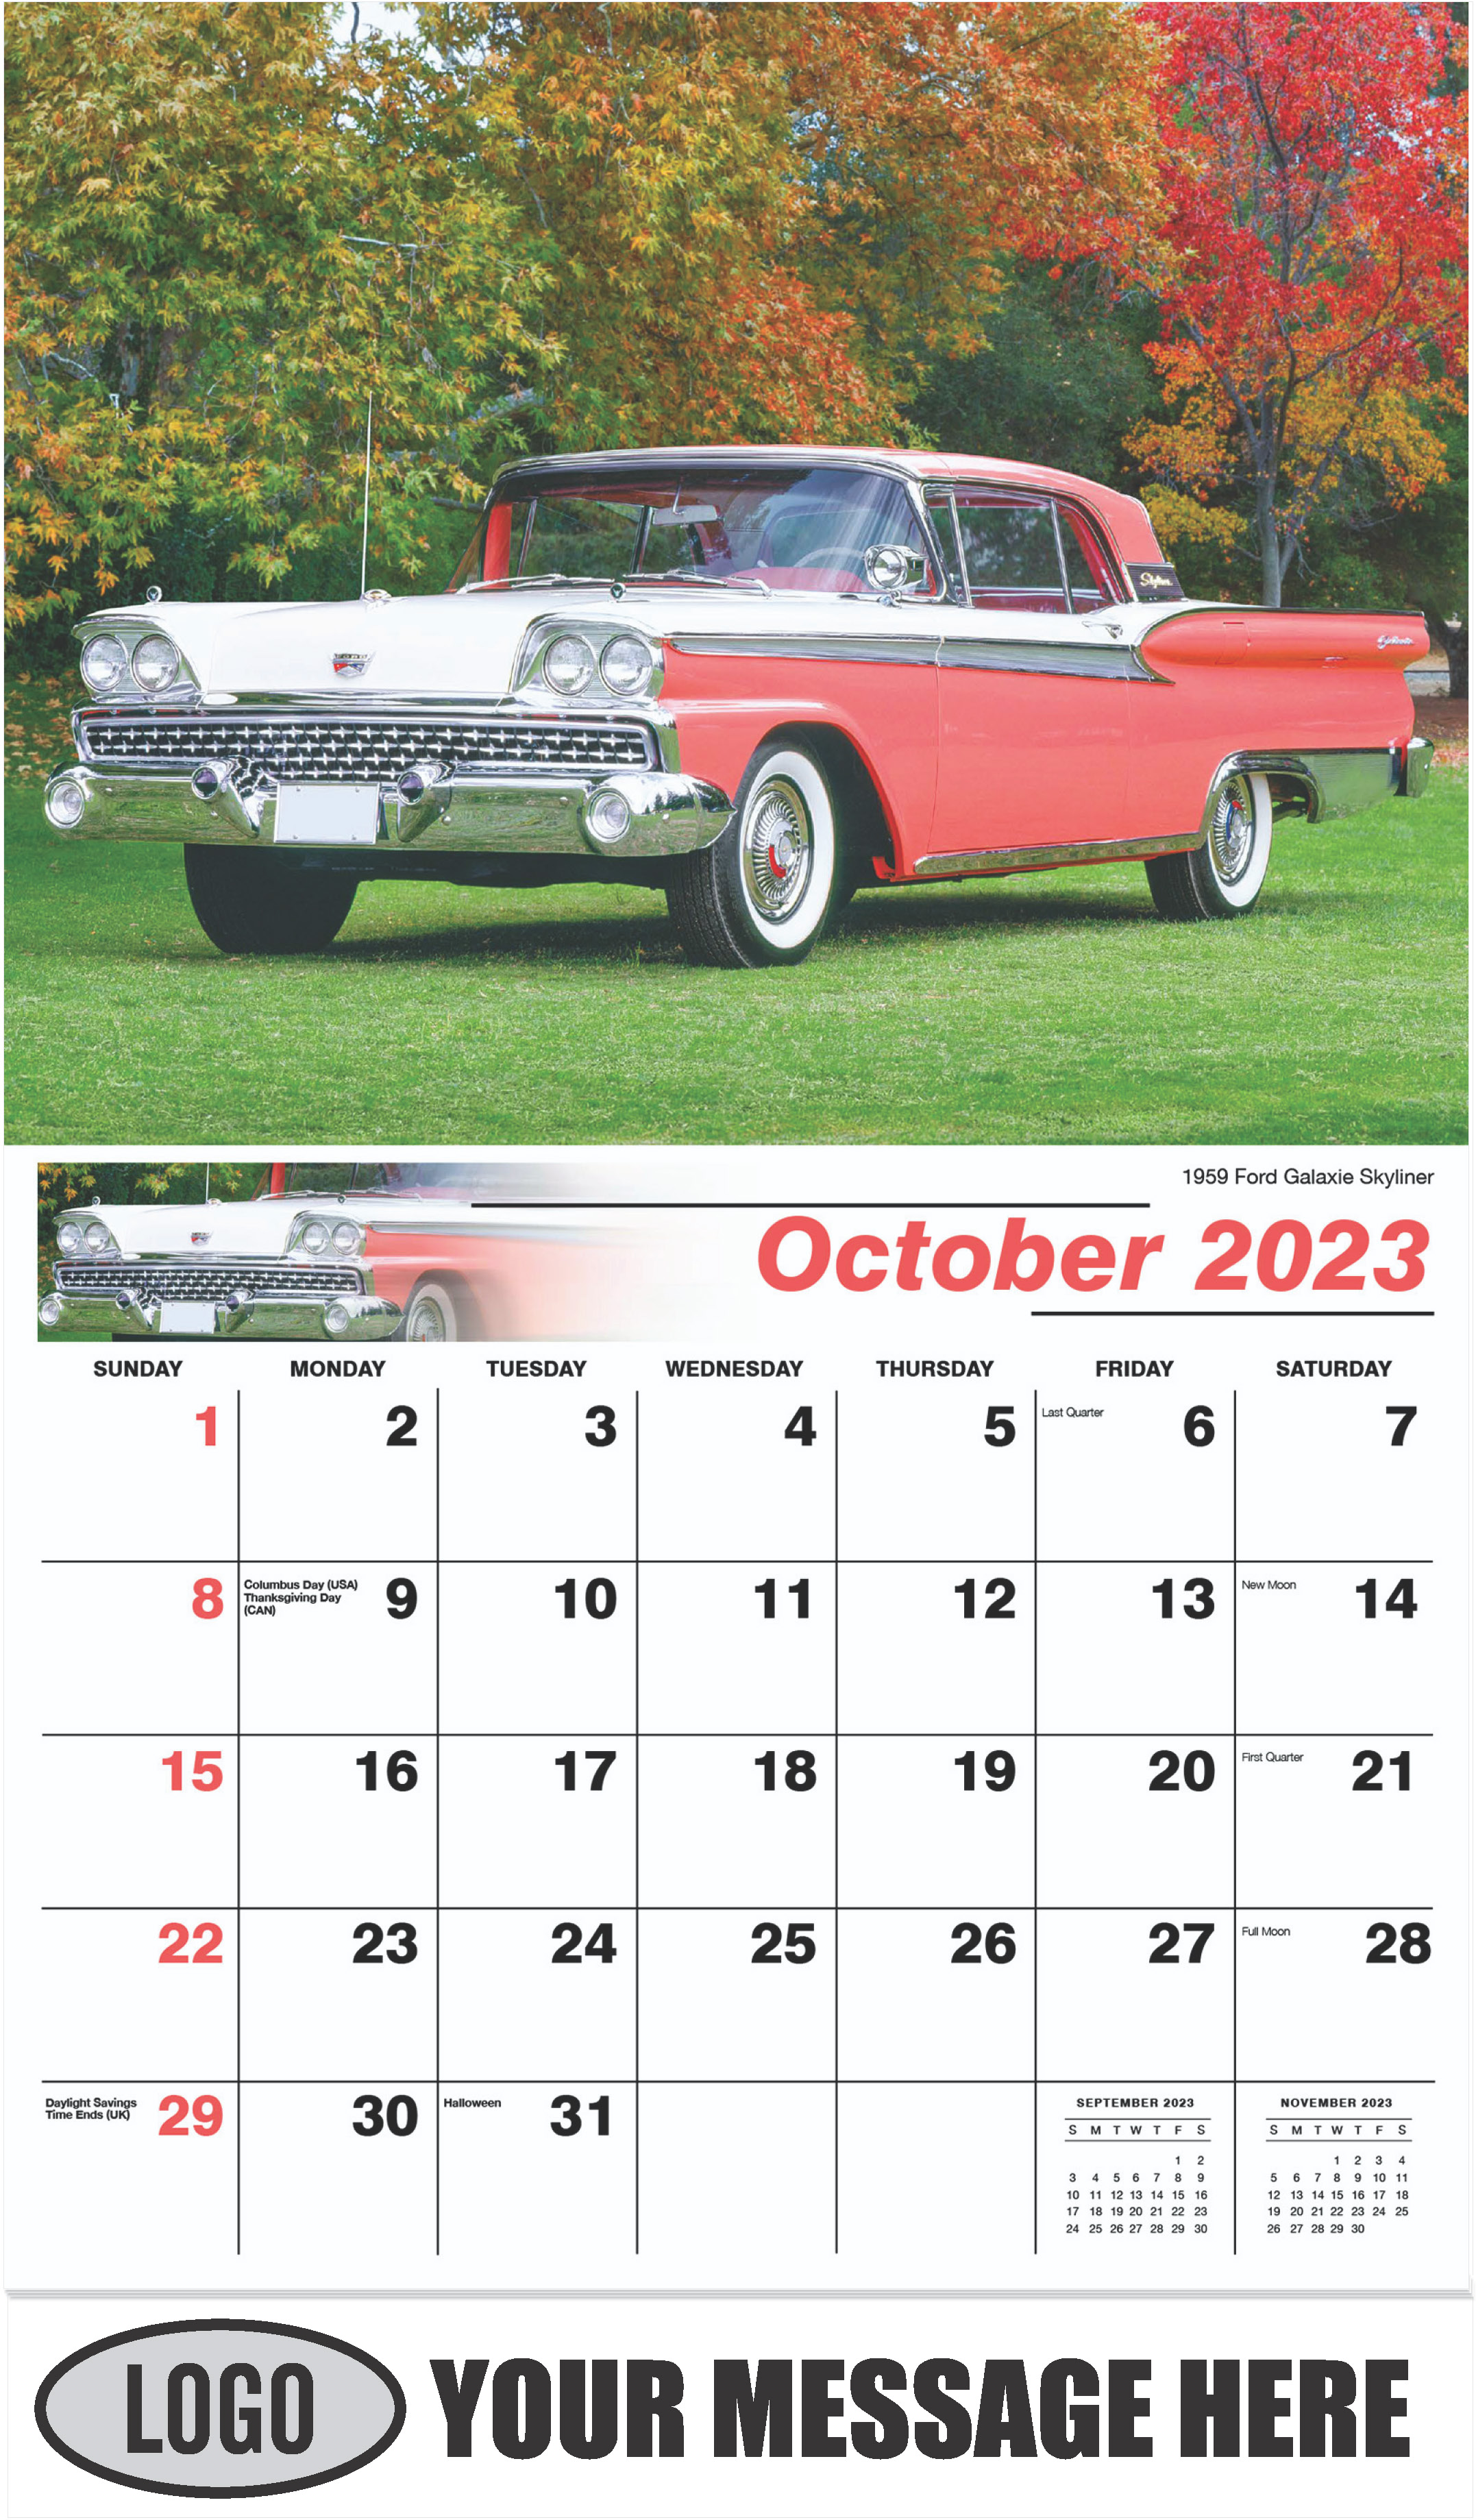 1959 Ford Galaxie Skyliner - October - Henry's Heritage Ford Cars 2023 Promotional Calendar